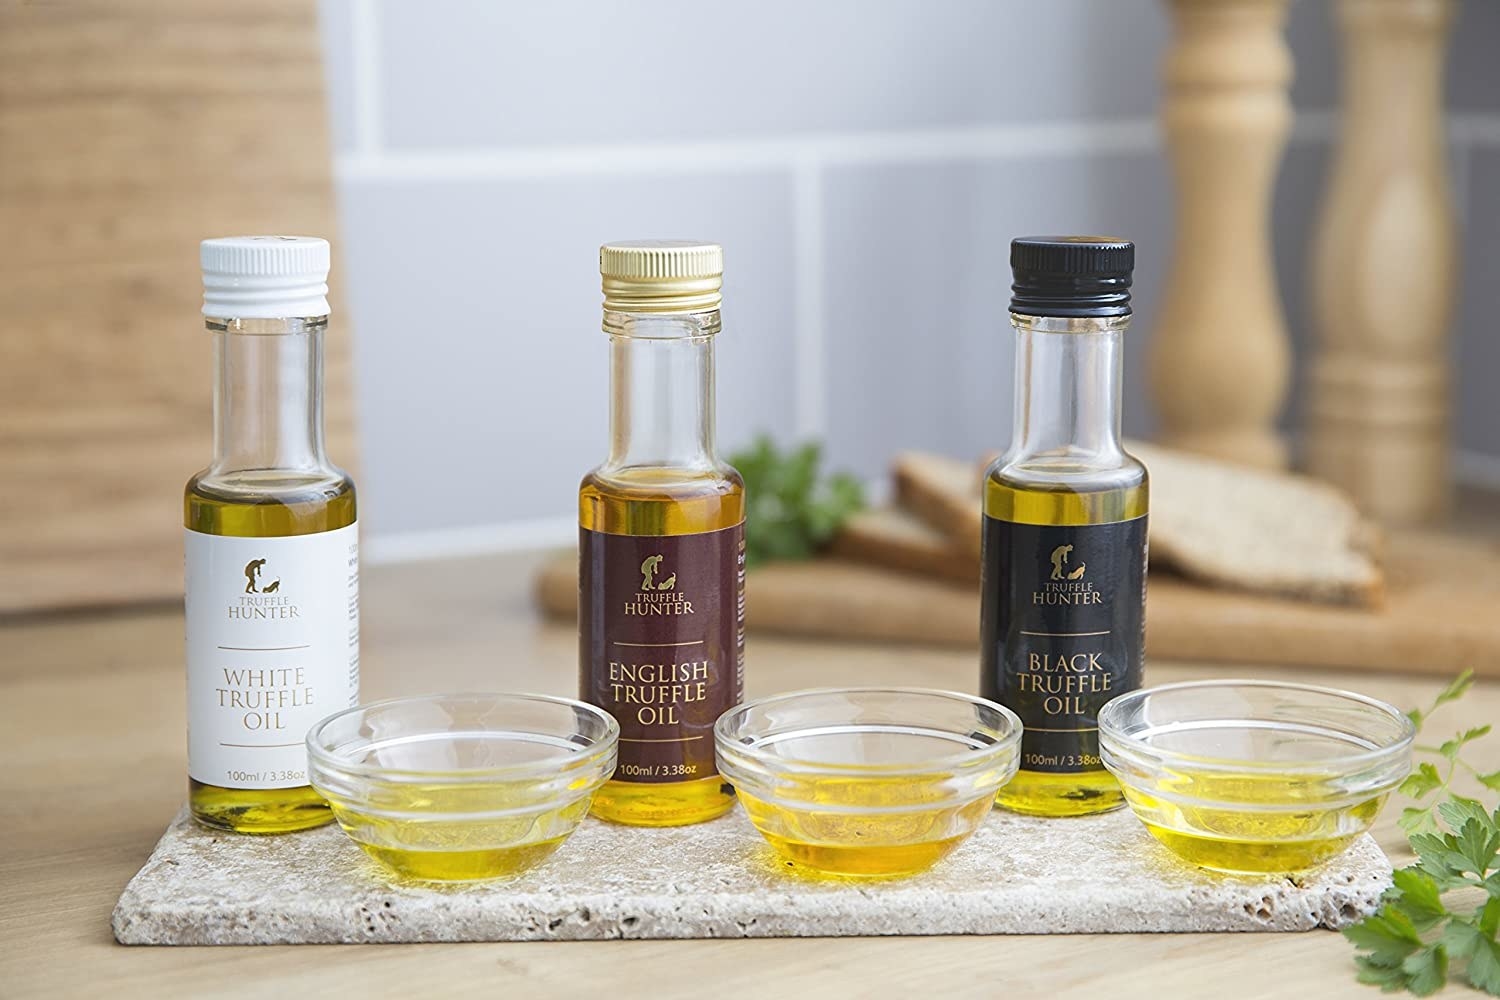 a set of three different truffle oils on a stone slab